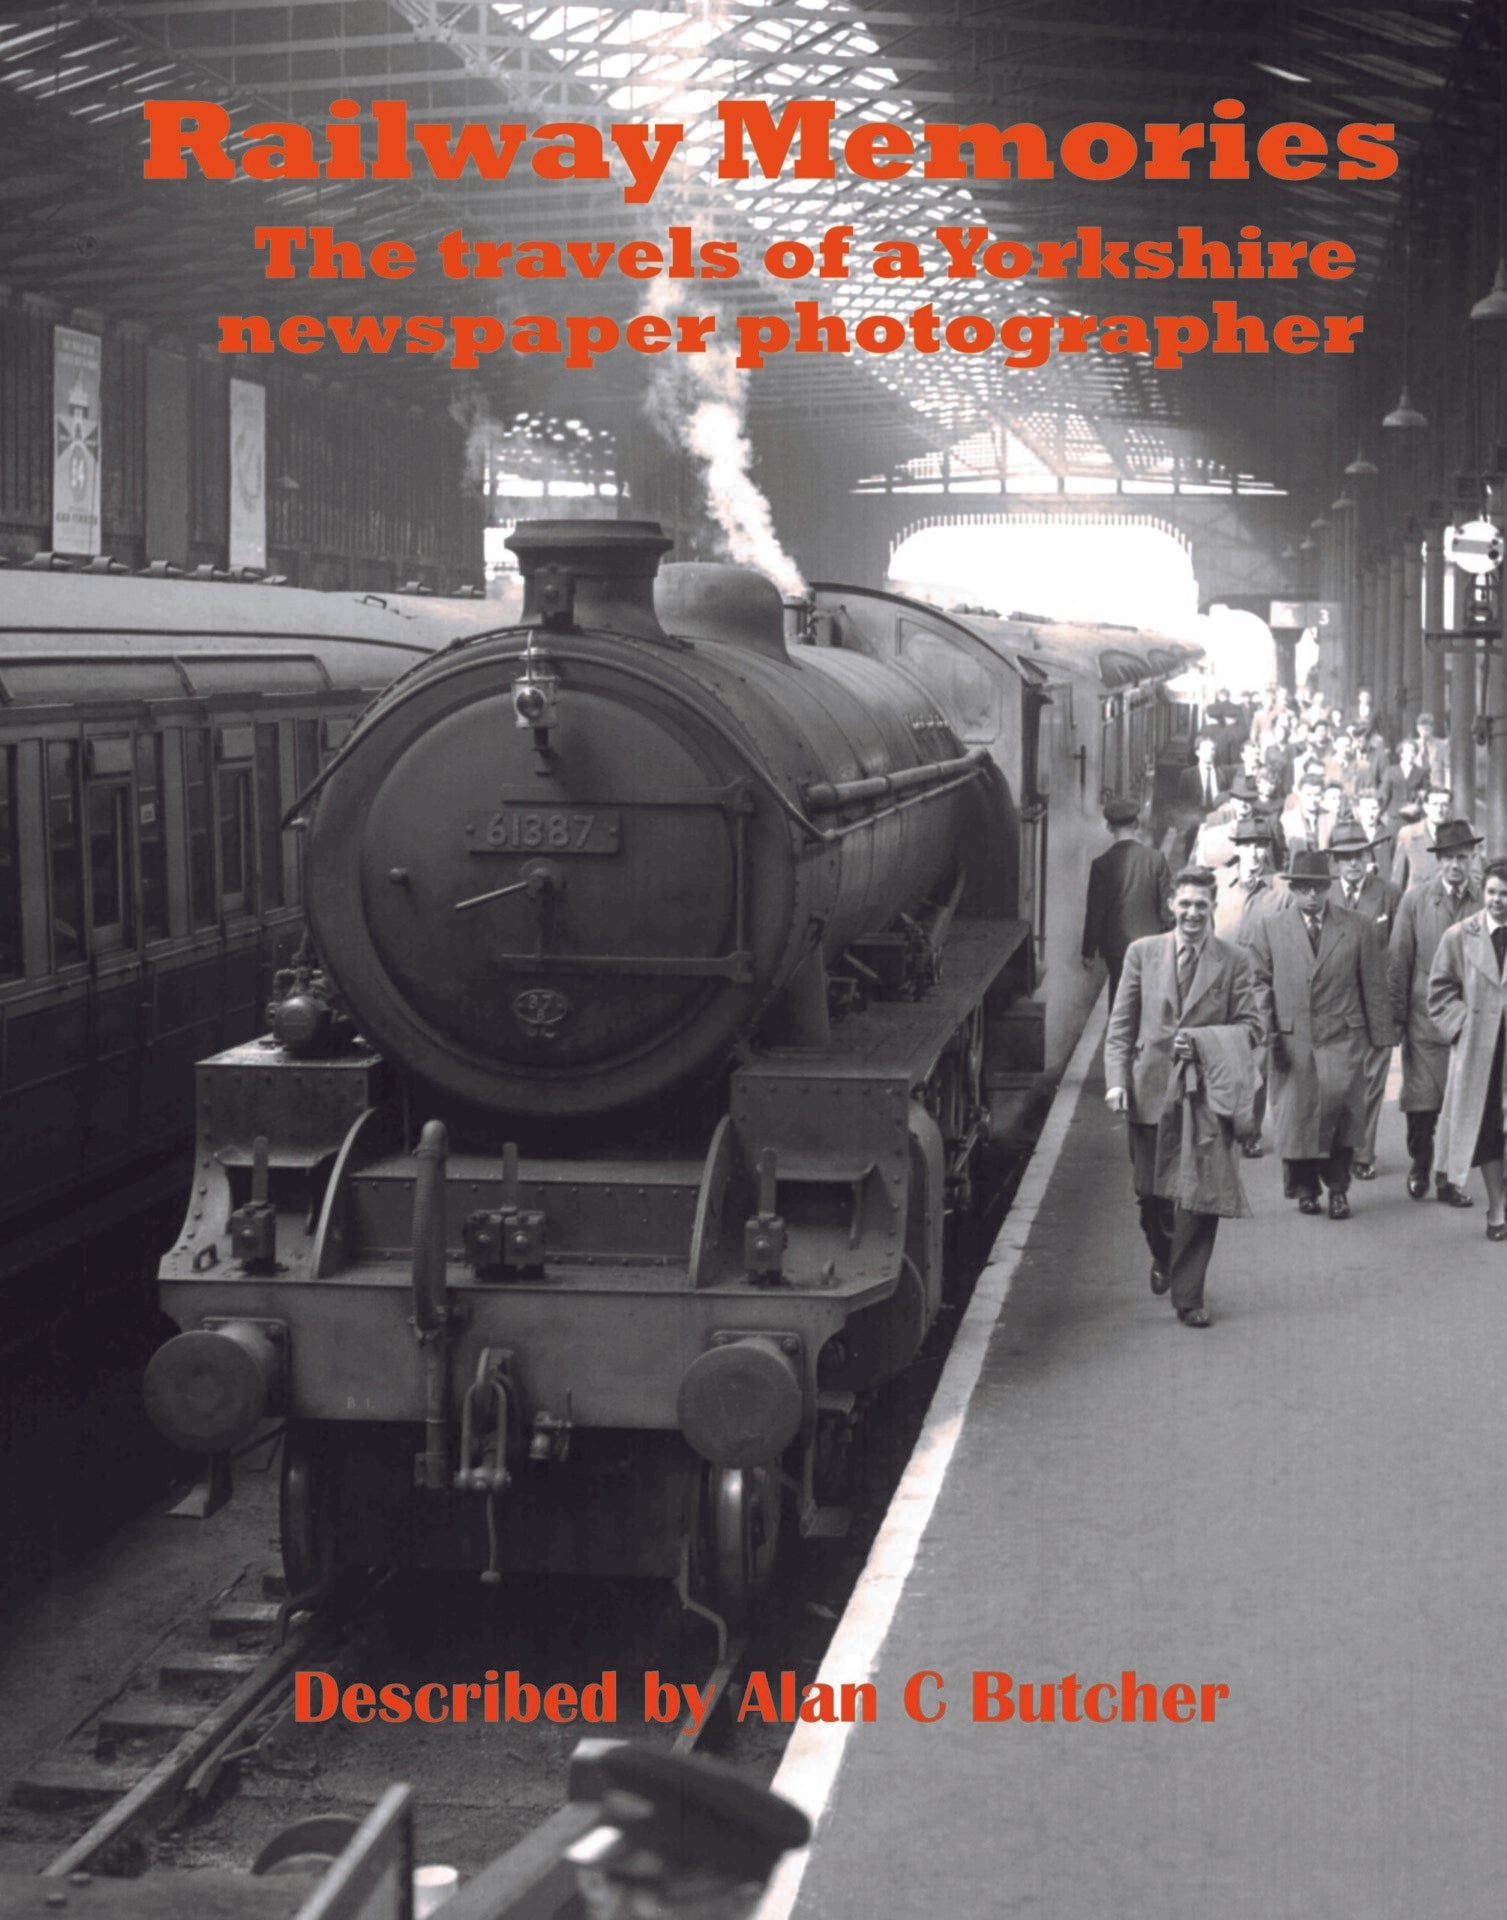 RAILWAY MEMORIES. THE TRAVELS OF A YORKSHIRE NEWSPAPER PHOTOGRAPHER